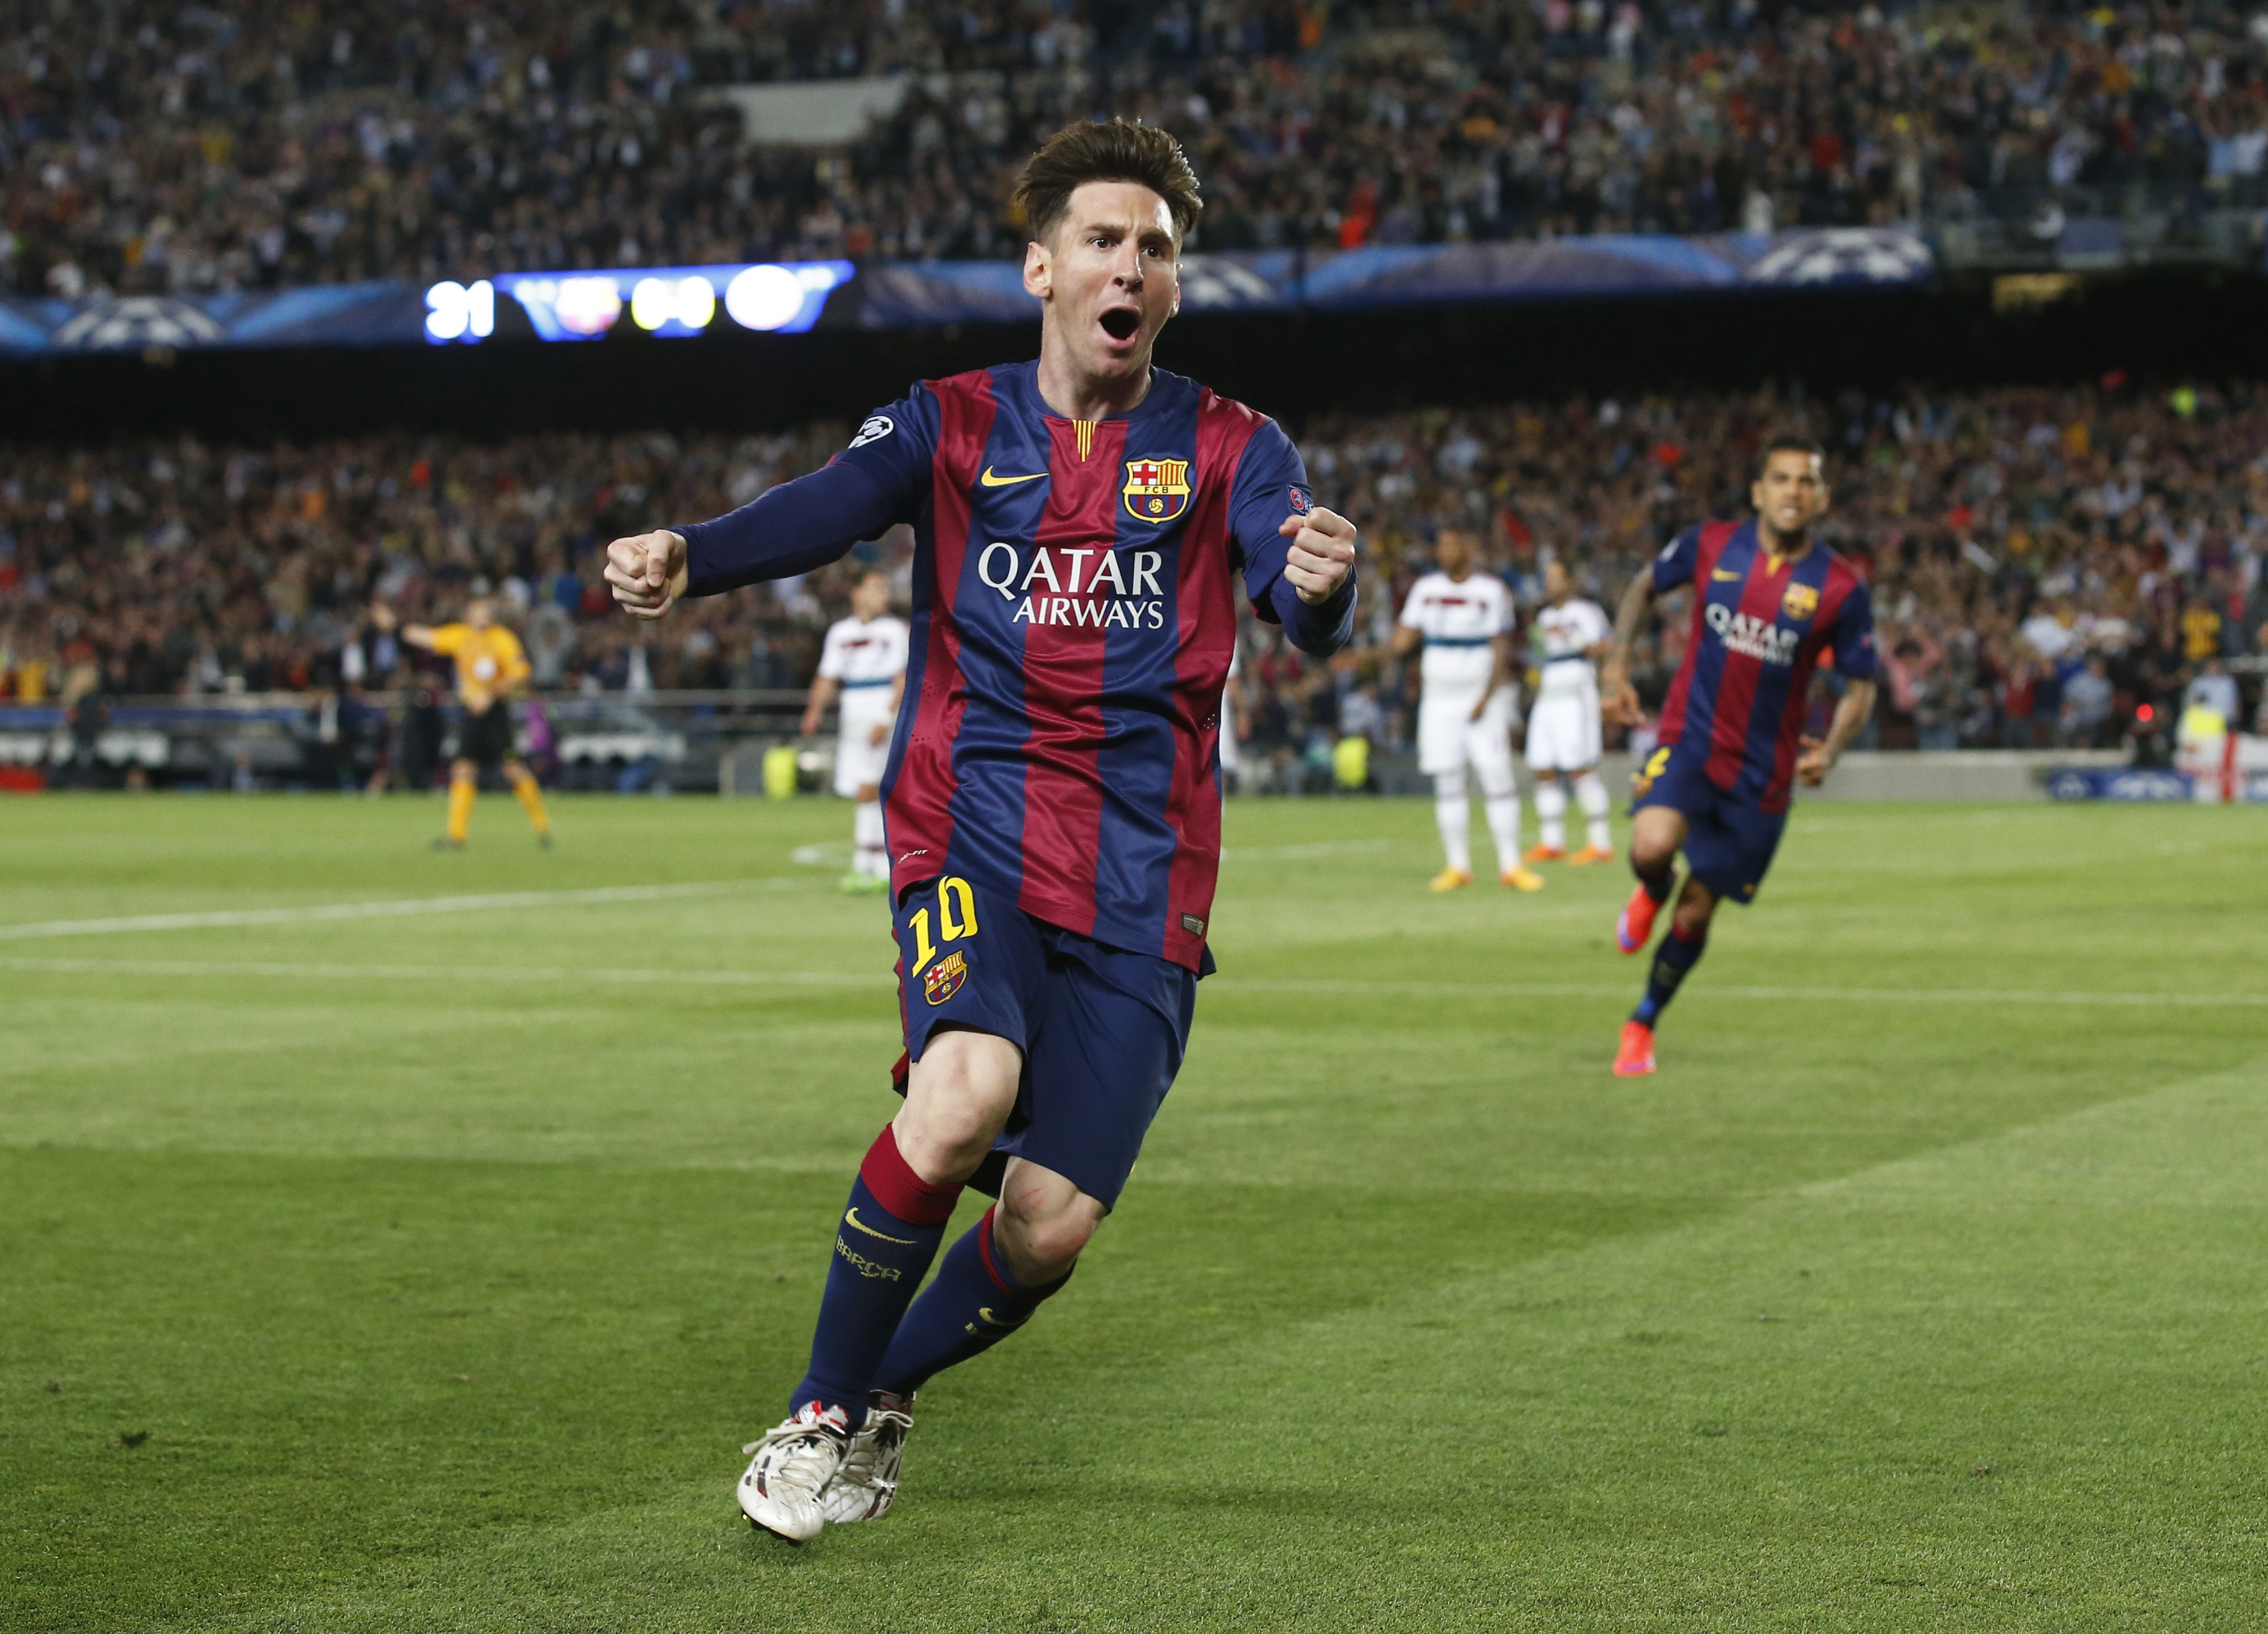 Barcelona's Lionel Messi celebrates his first goal  against Bayern Munich in the UEFA Champions League Semi Final First Leg at The Nou Camp in Barcelona on May 5, 2015.